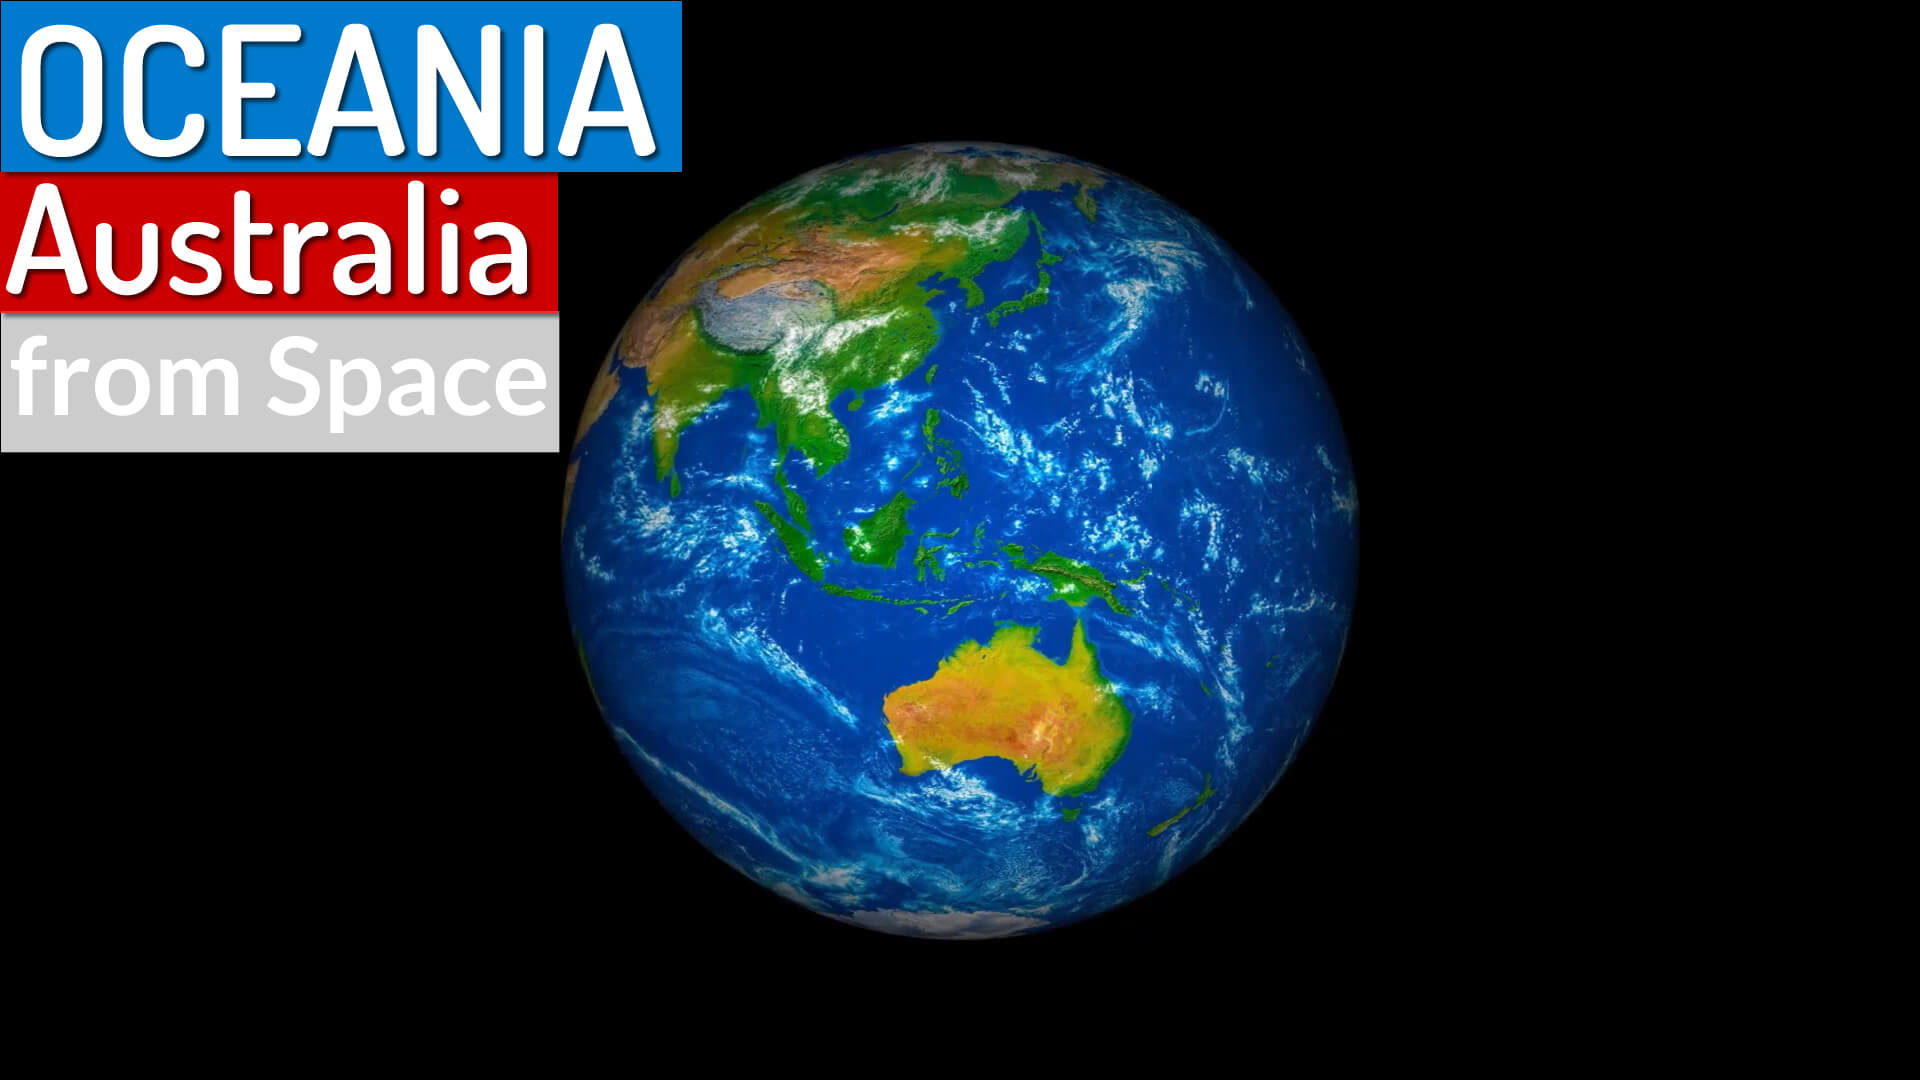 Oceania and Australia from Space